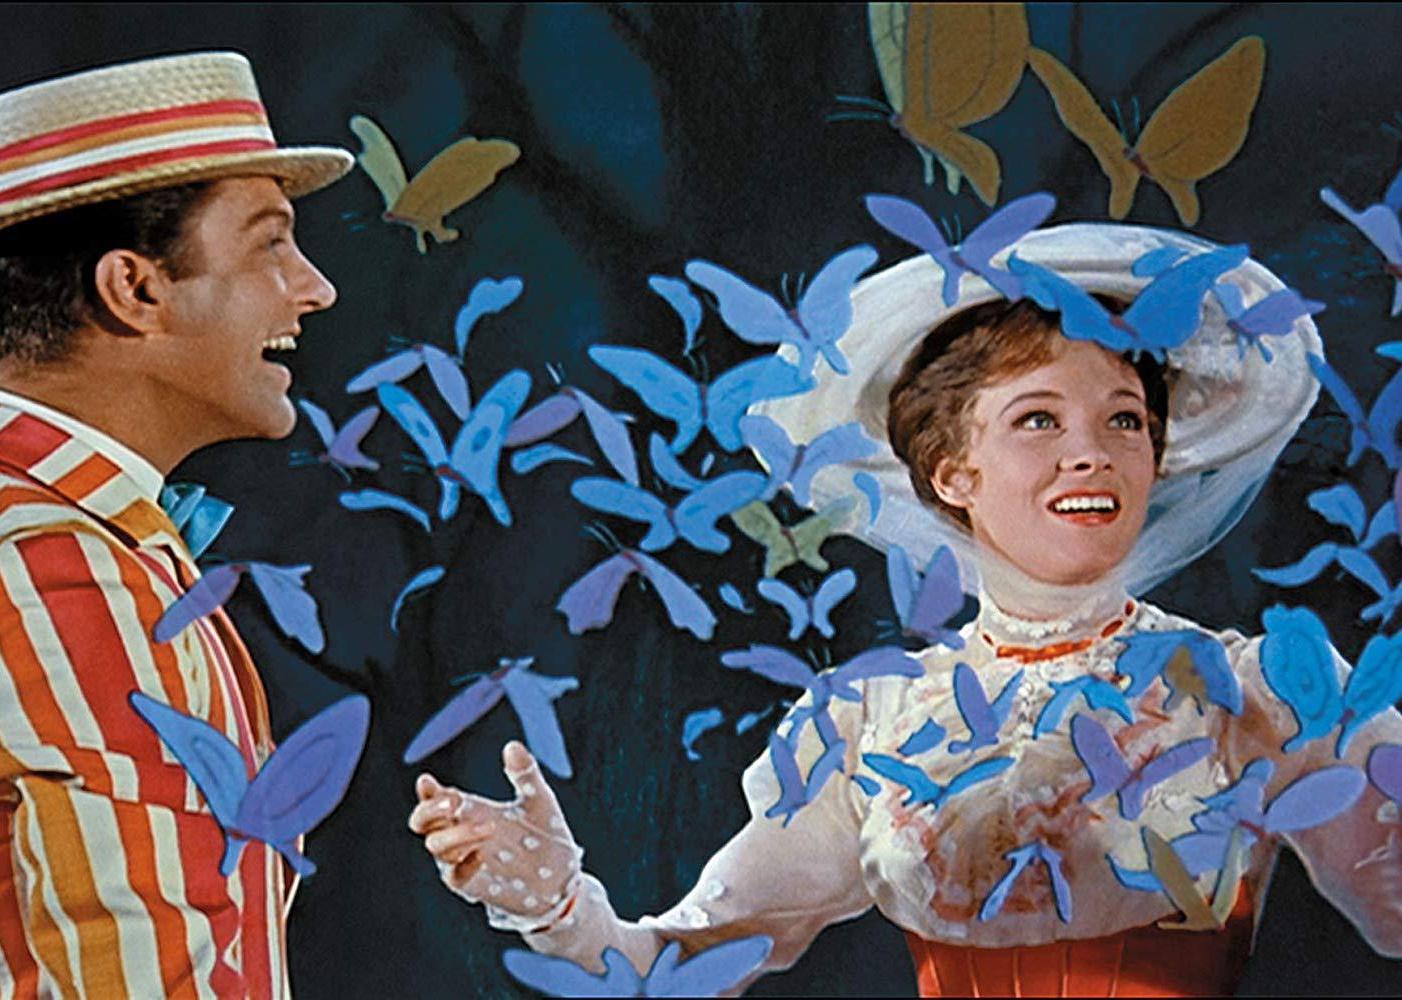 Julie Andrews and Dick Van Dyke laughing while cartoon butterflies surround them.